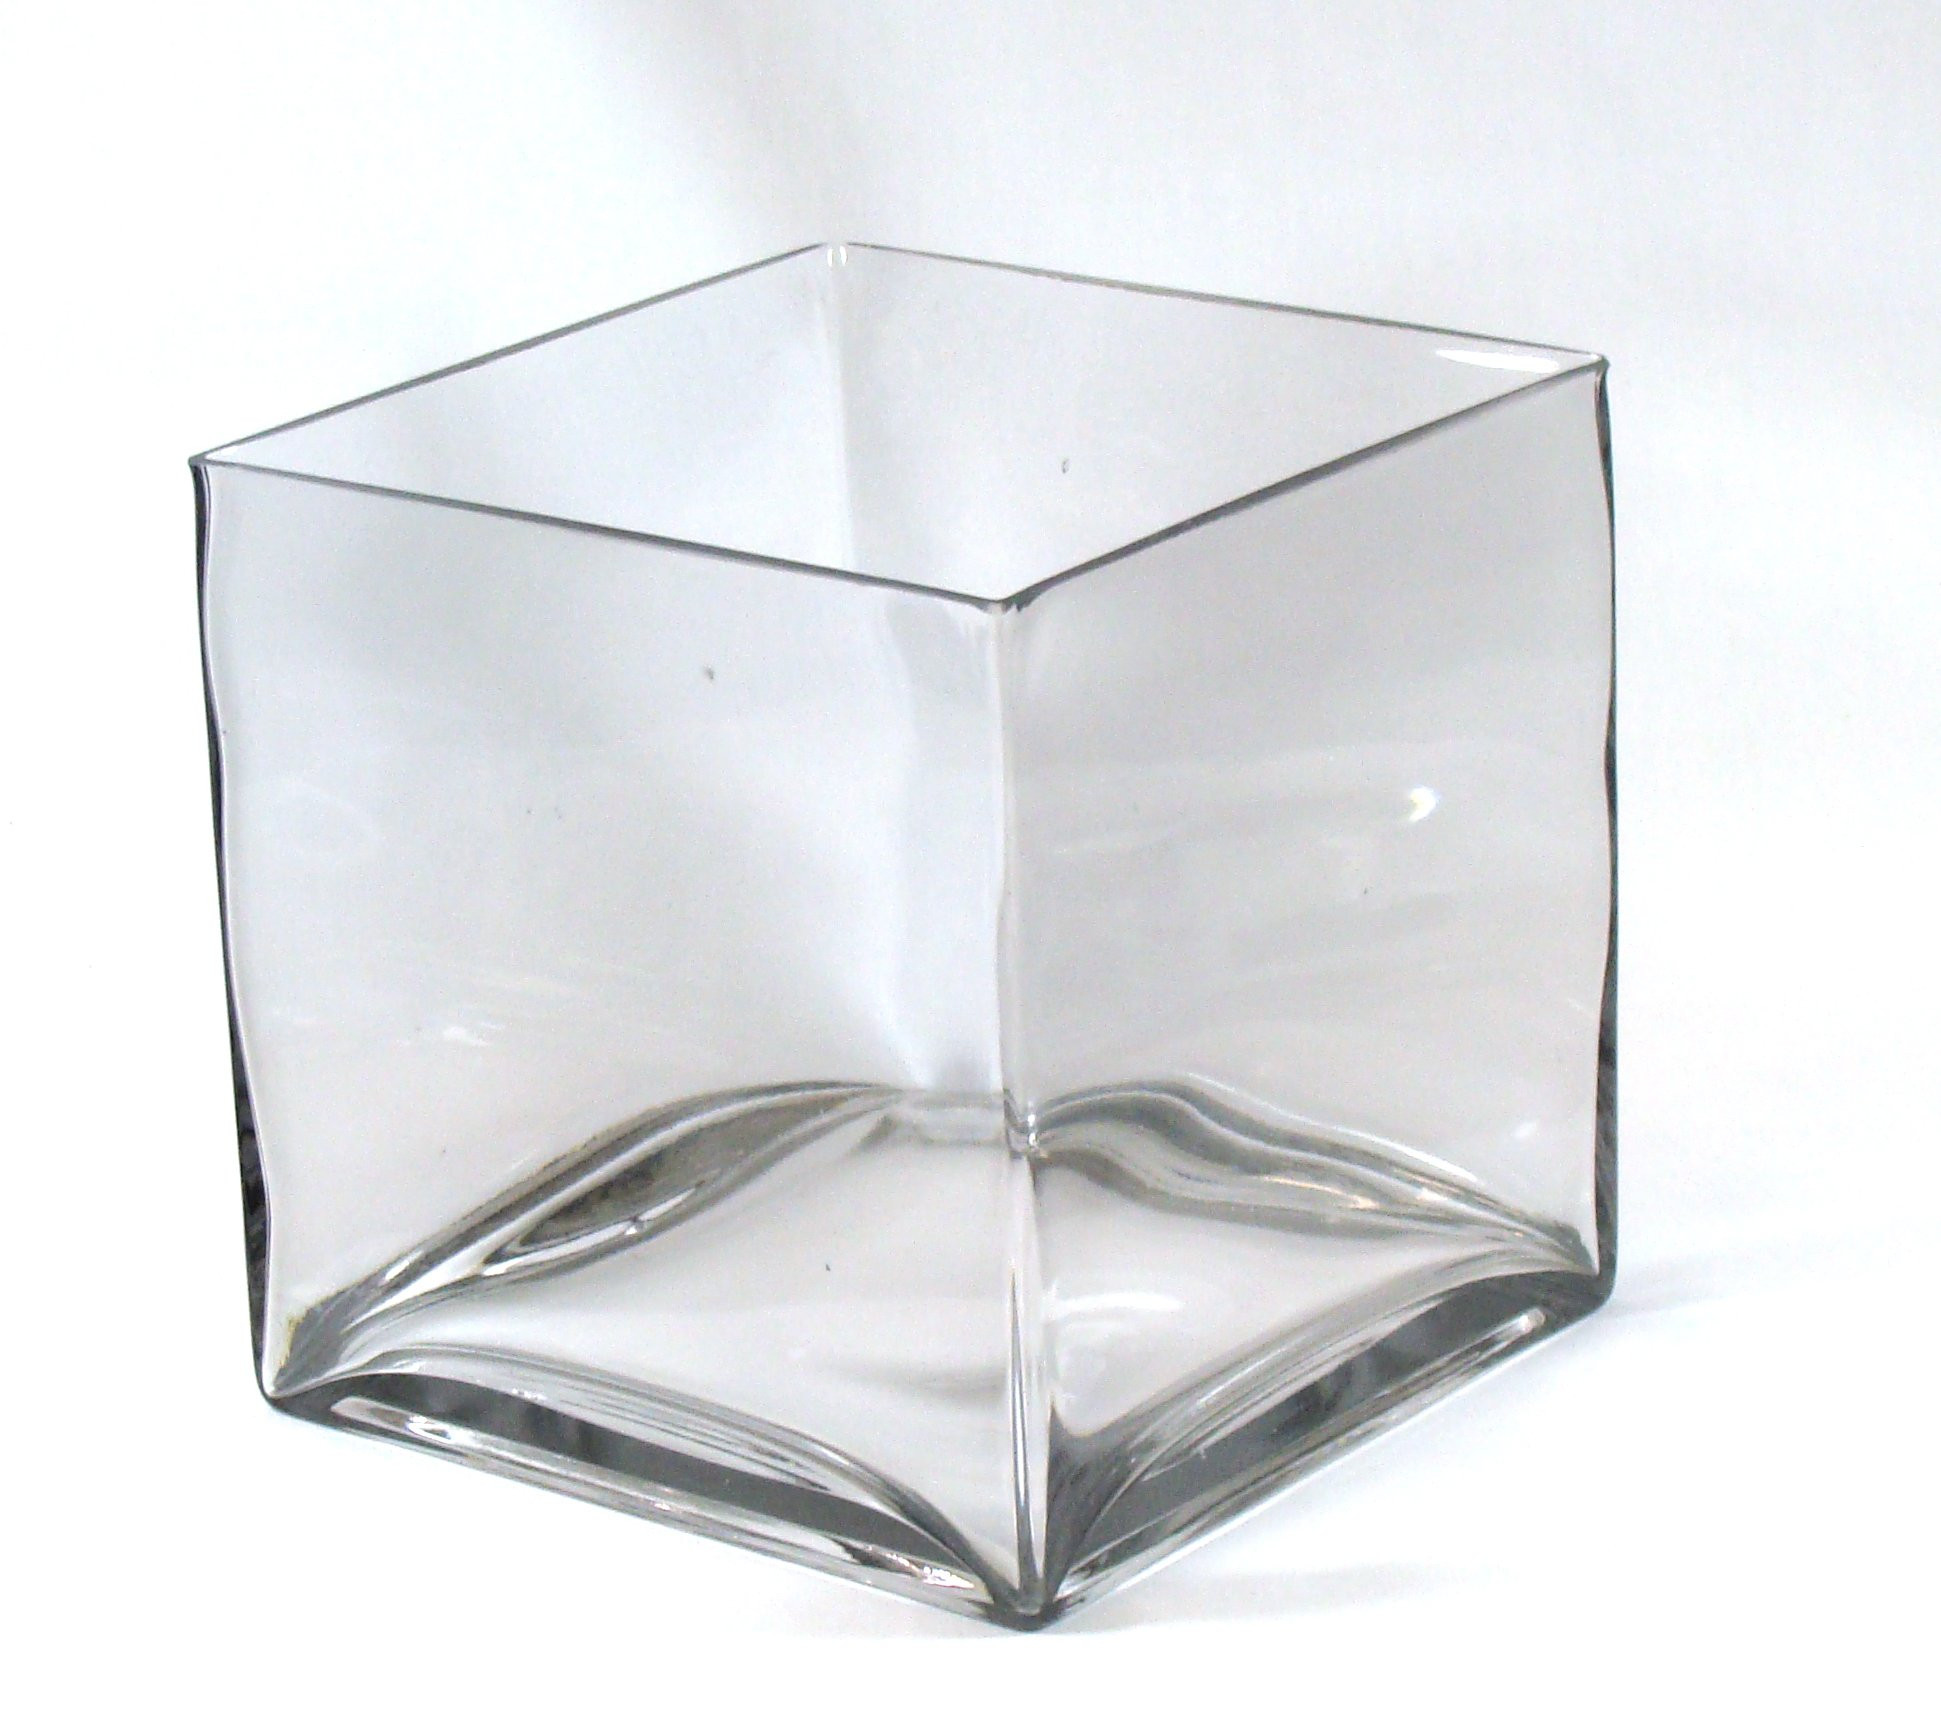 21 Lovely 6 Inch Round Glass Vase 2024 free download 6 inch round glass vase of buy 8 inch round large glass vase 8 clear cylinder oversize with 8 square large glass vase 8 inch clear cube oversize centerpiece 8x8x8 candleholder